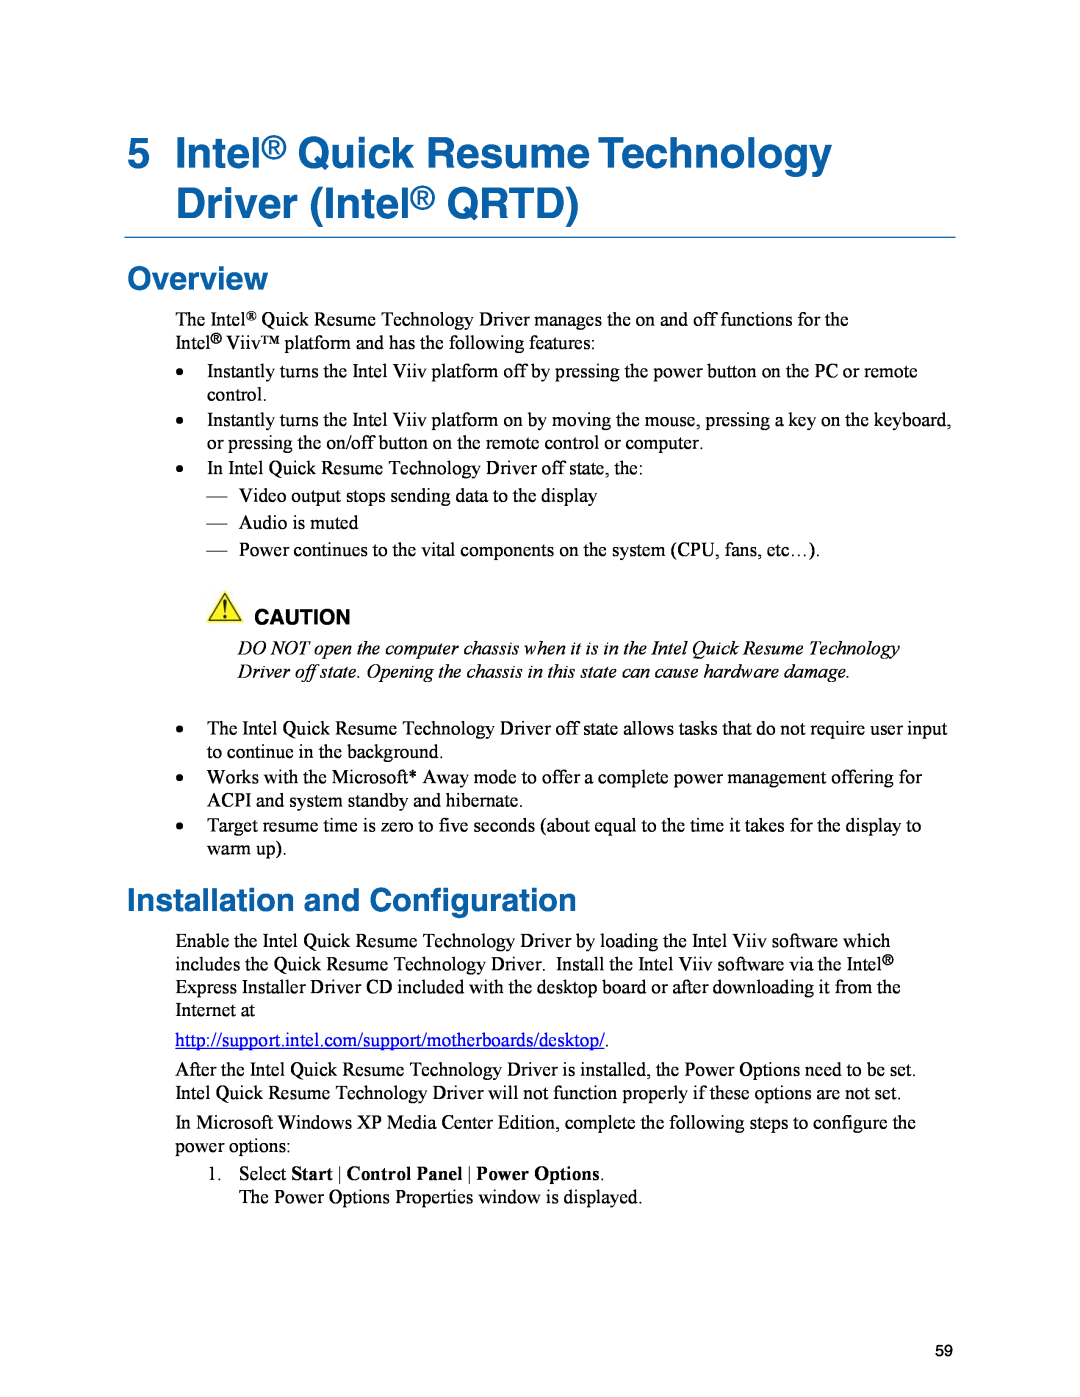 Intel D945GPM manual Intel Quick Resume Technology Driver Intel QRTD, Overview, Installation and Configuration 